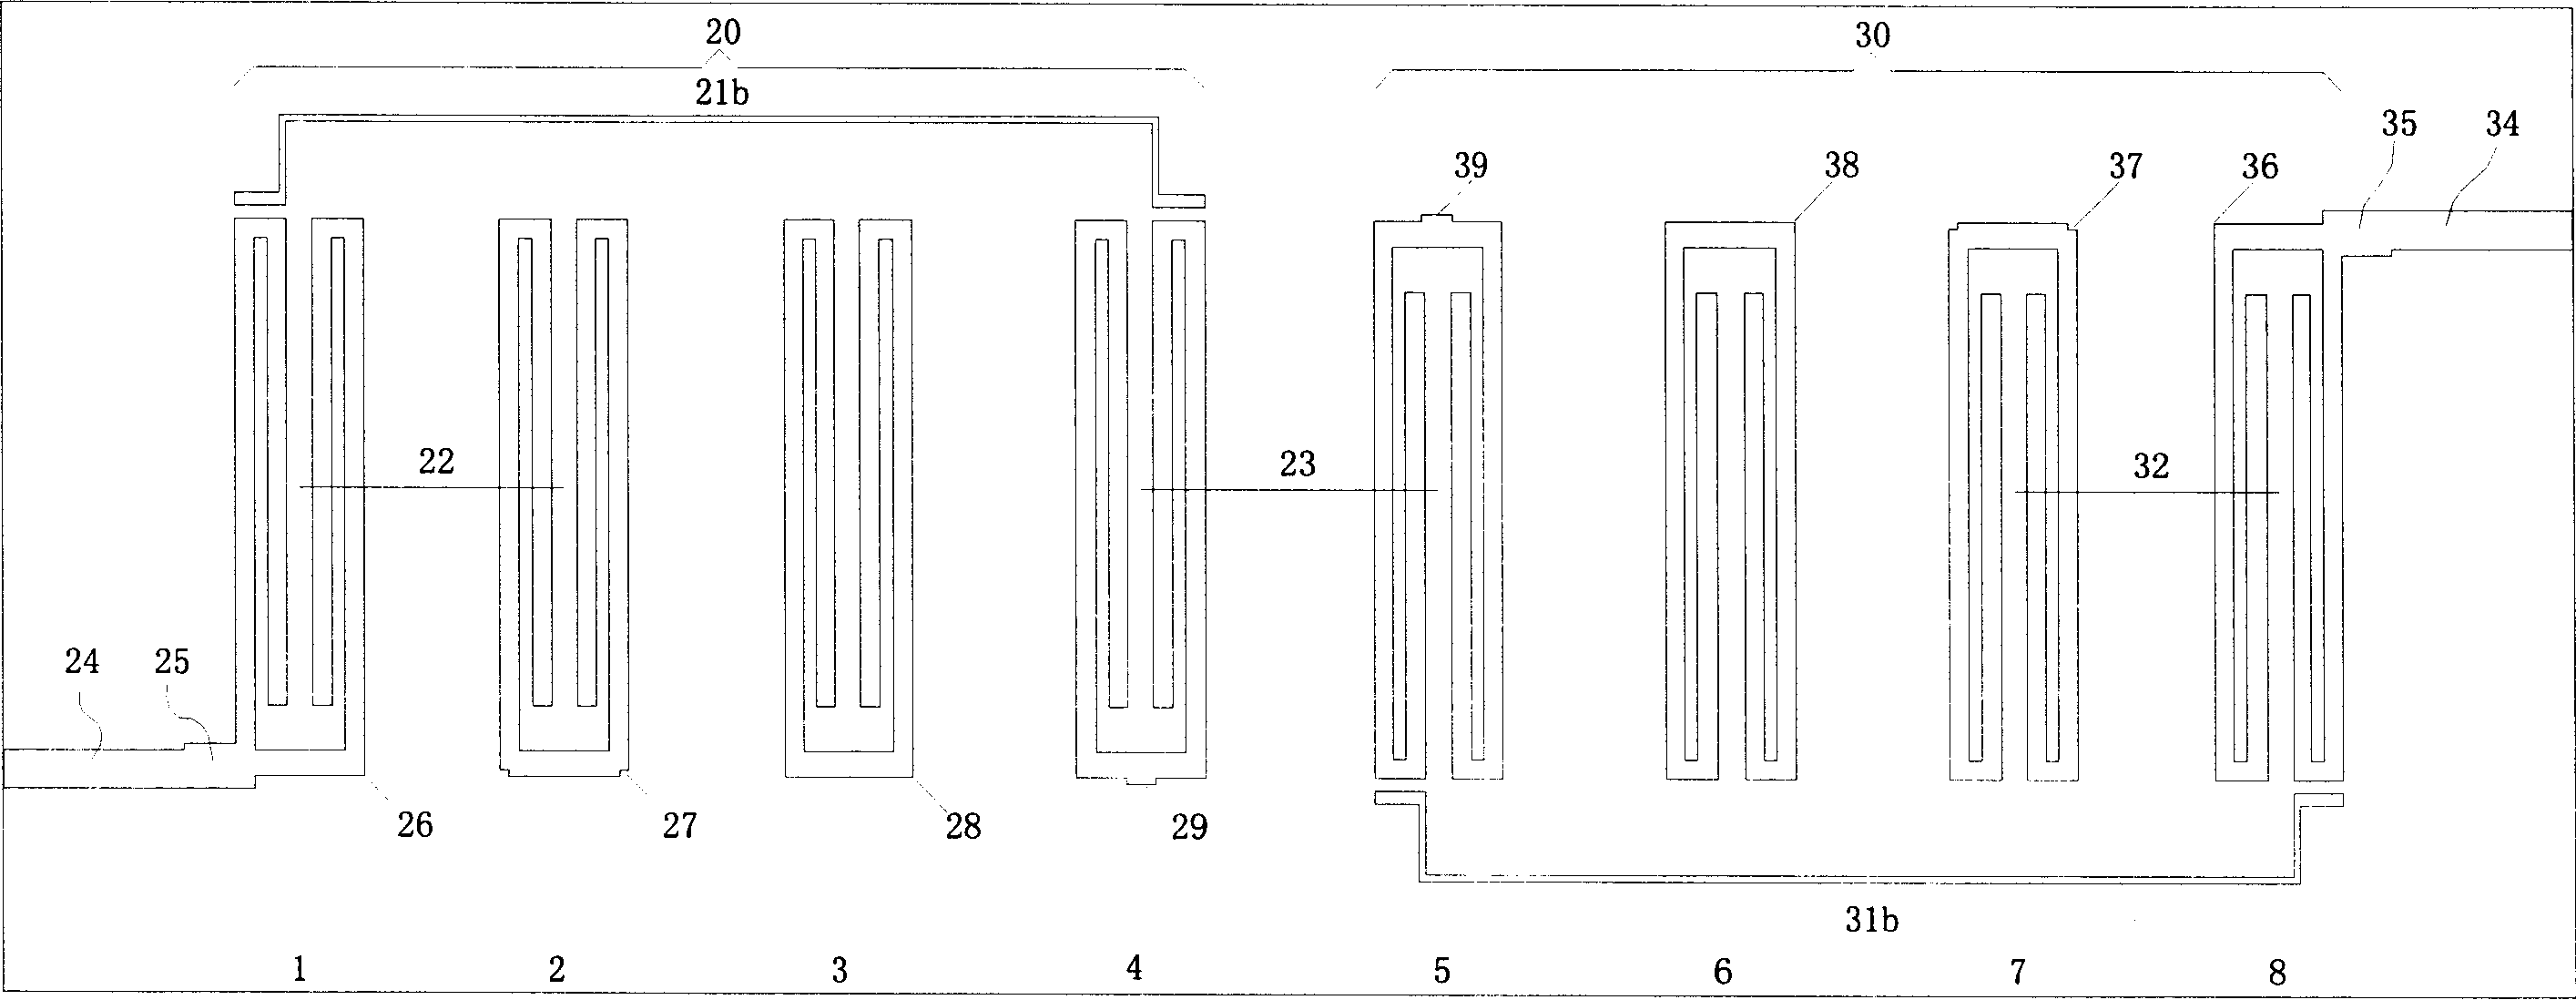 Crossing coupled filter of anti-parallel fold line